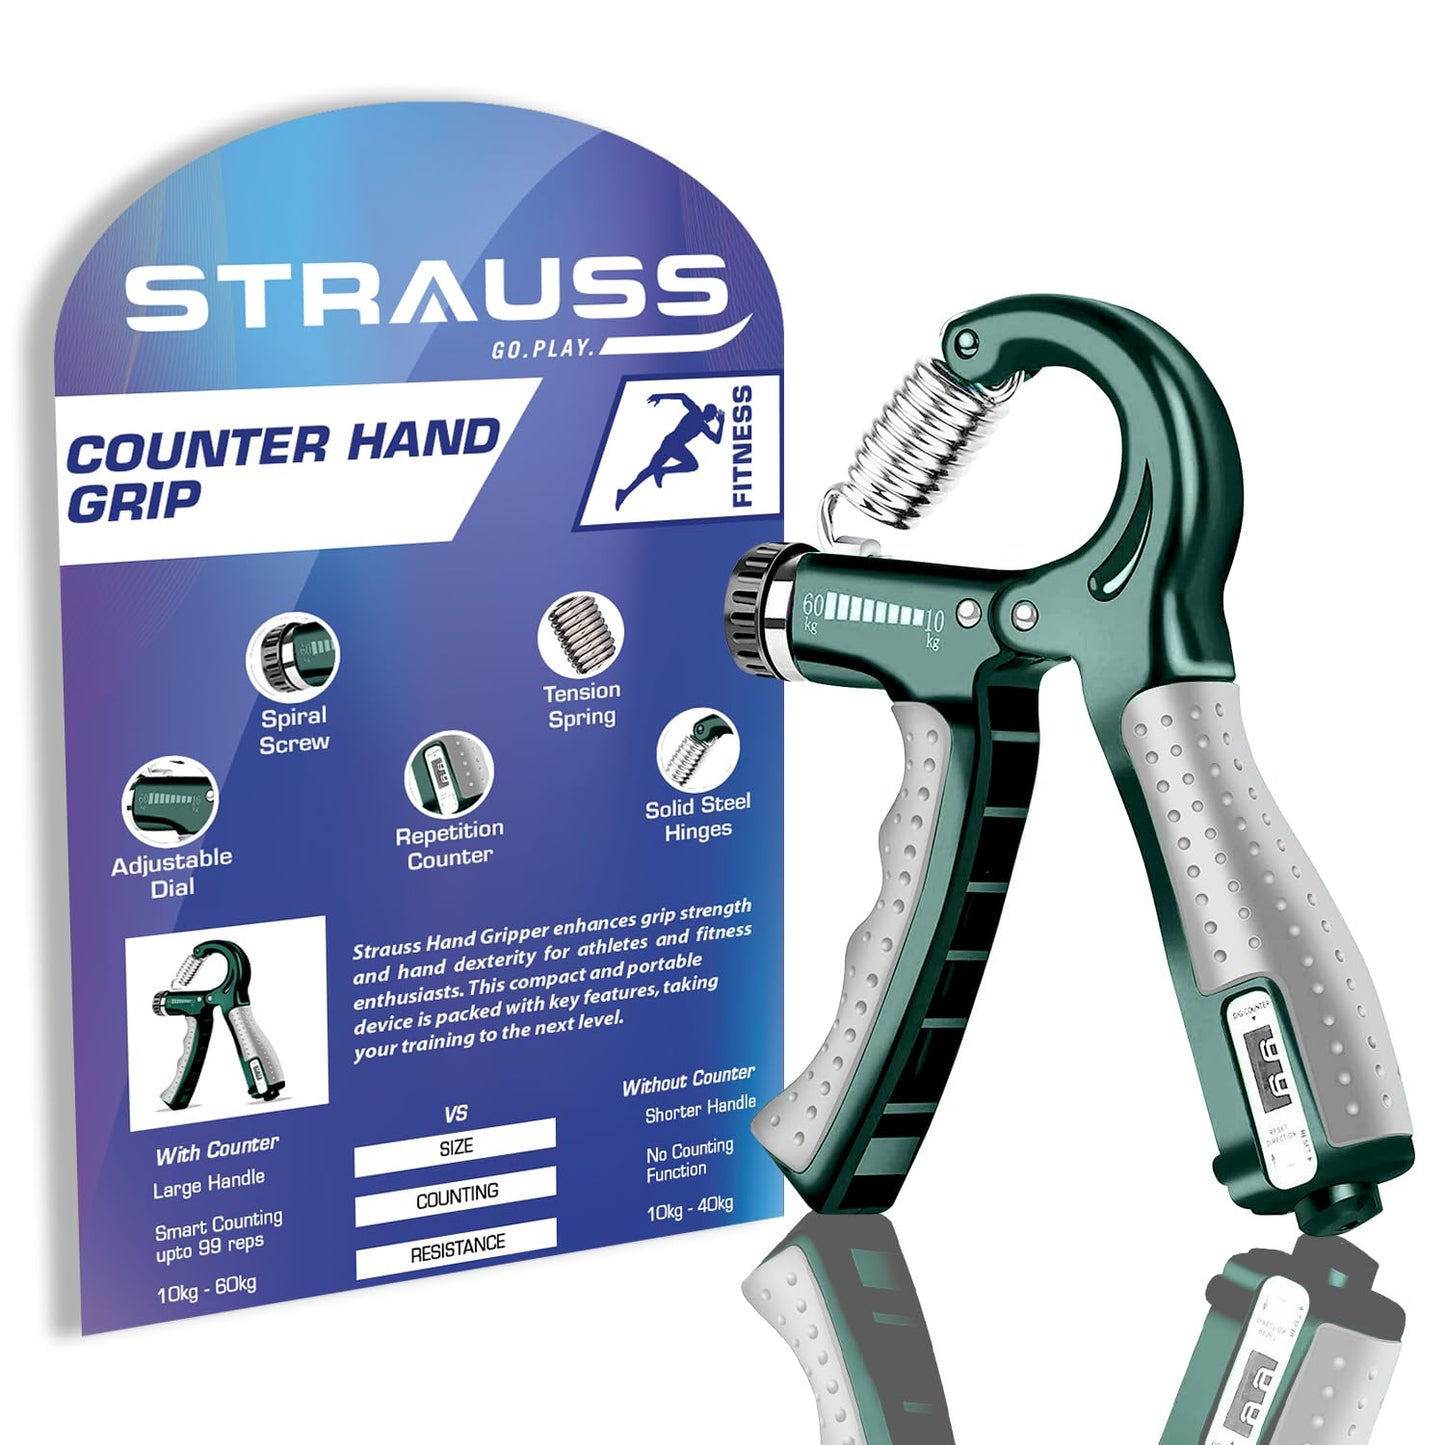 Strauss Adjustable Hand Grip Adjustable Resistance 10KG - 40KG  Hand Gripper for Home  Gym Workouts  Perfect for Finger  Forearm Hand Exercises  Strength Building for Men  Women Dark Green